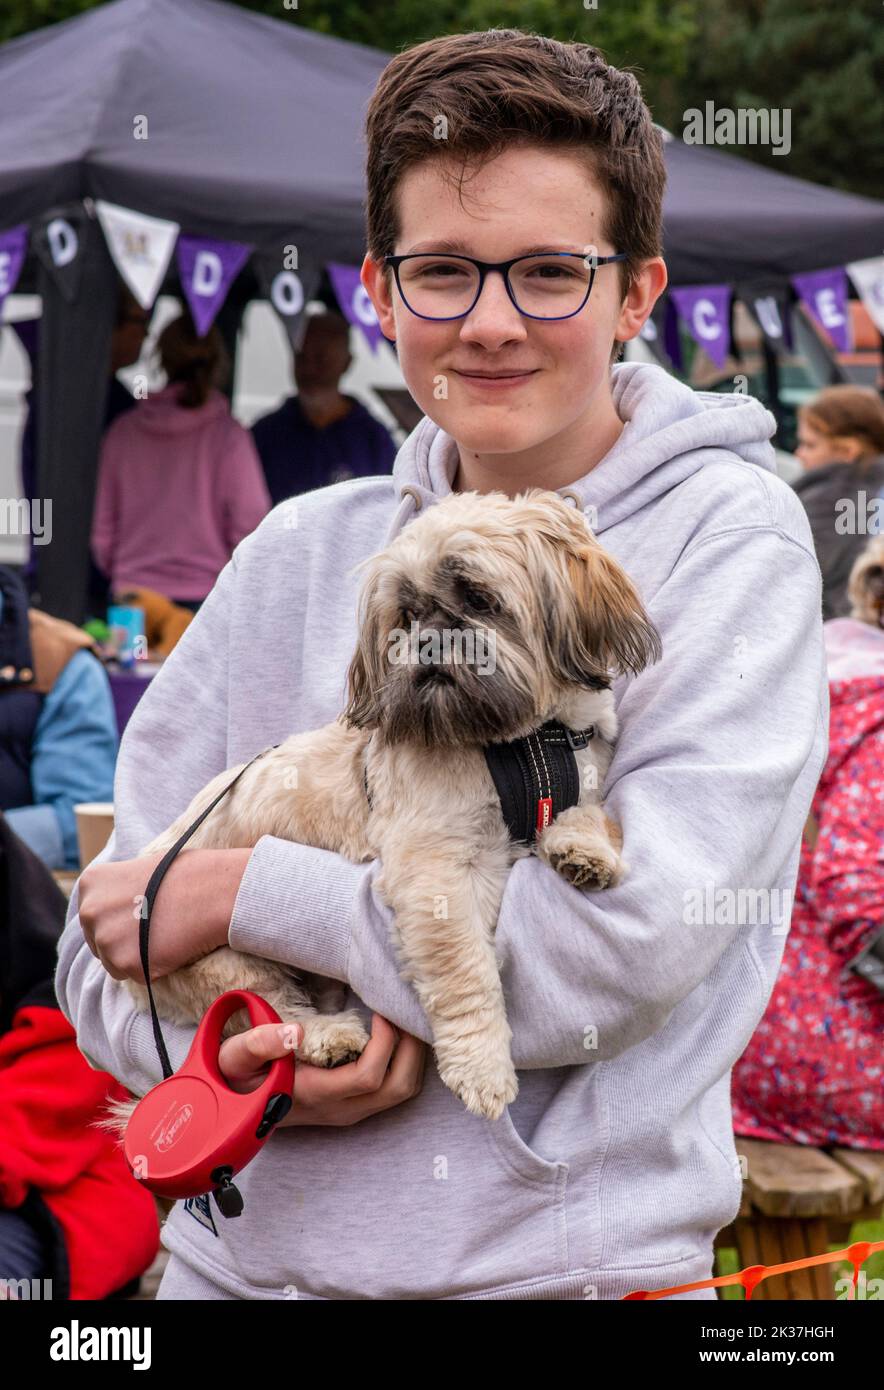 Follifoot, near Harrogate, North Yorkshire, 25th September 2022. The Follifoot Dog Festival where dog lovers were able to show off their beloved pets today. Picture Credit: ernesto rogata/Alamy Live News Stock Photo